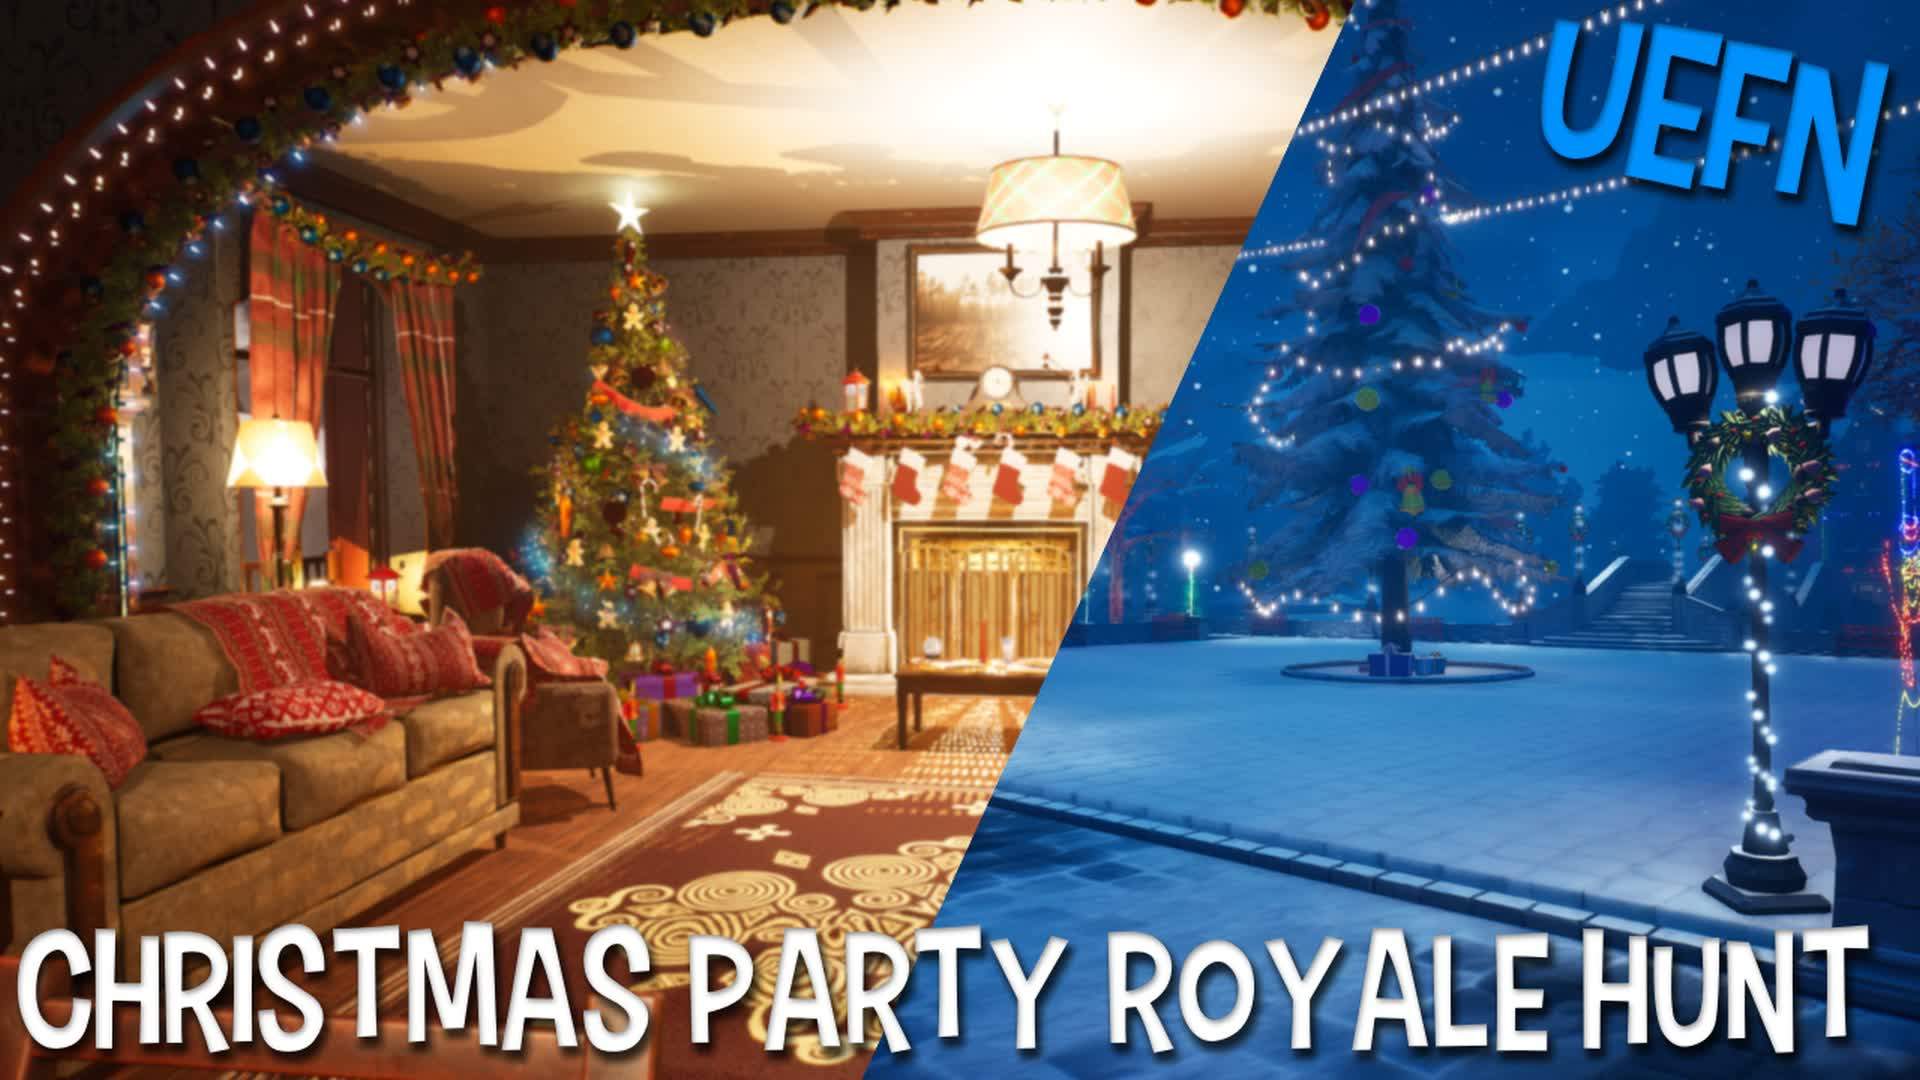 ⛄ Christmas Party Royale Hunt 🎄